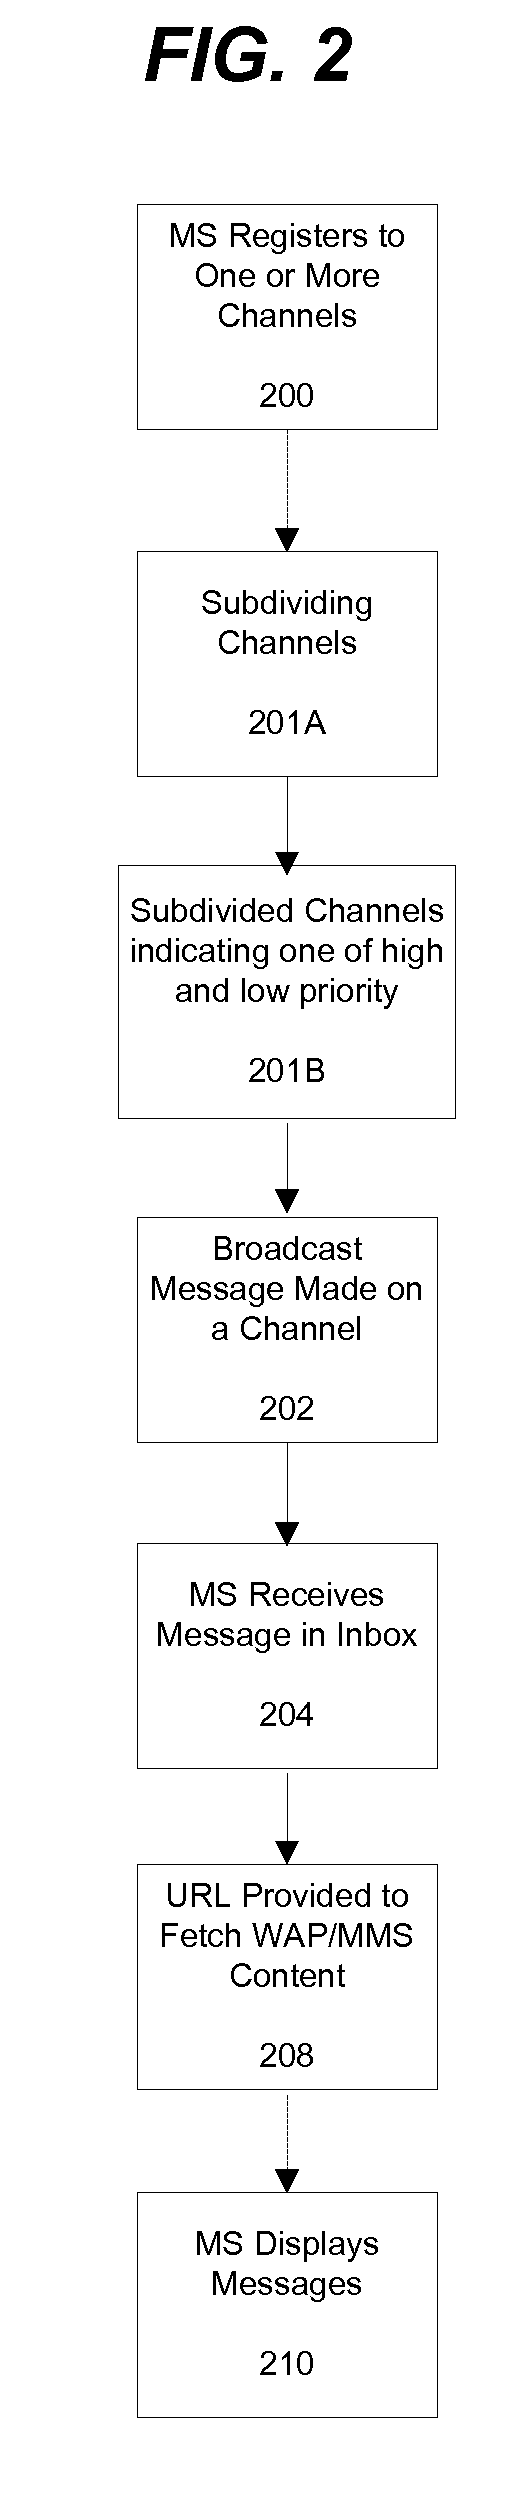 WAP push over cell broadcast